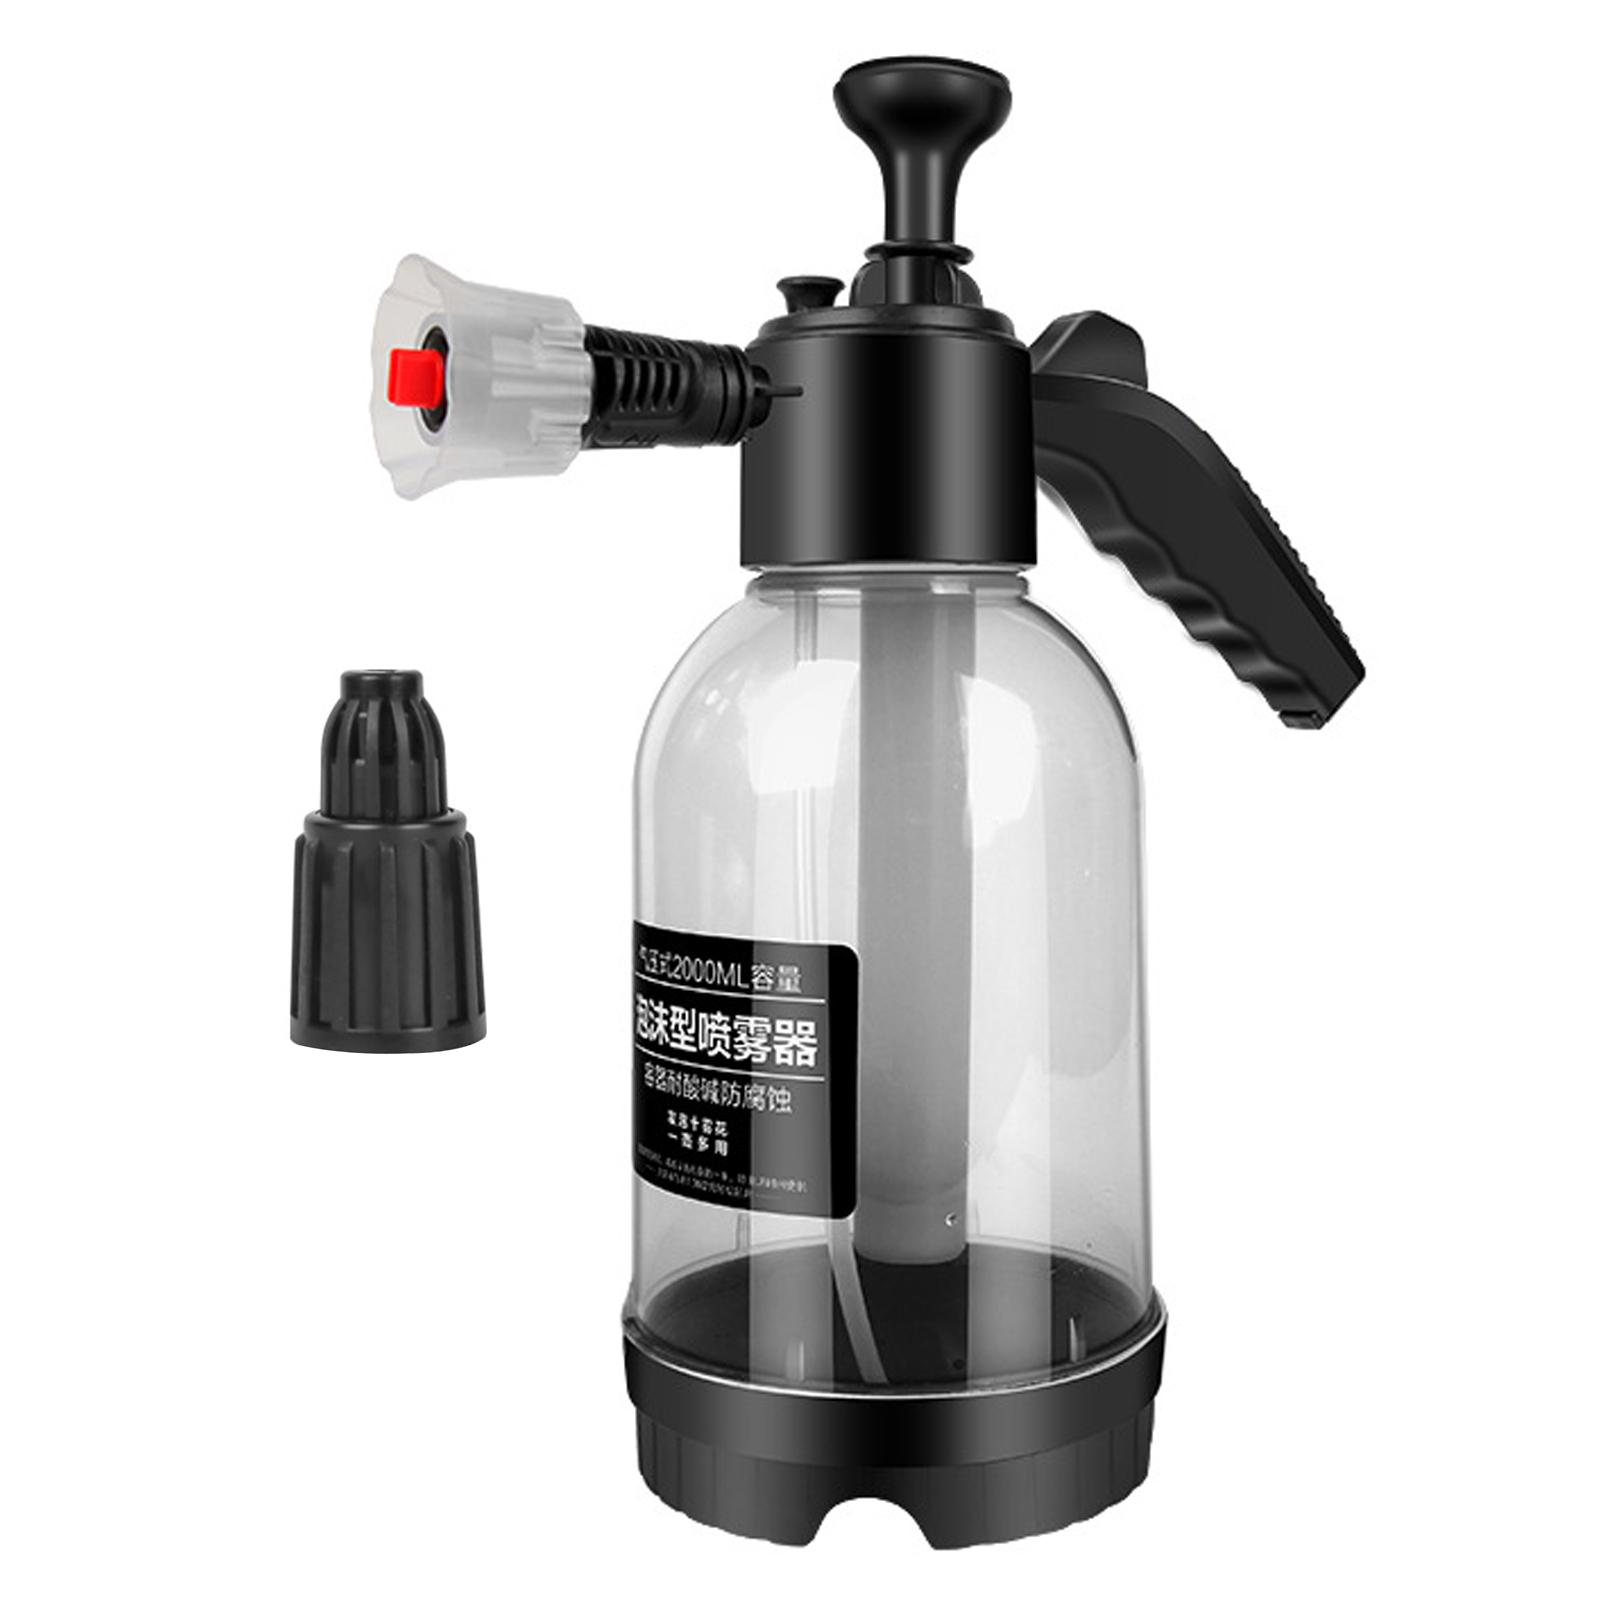 car wash Foam Pressure Sprayer 2L Multipurpose Water Spray Bottle Auto  Cleaning Equipment for Indoor clear